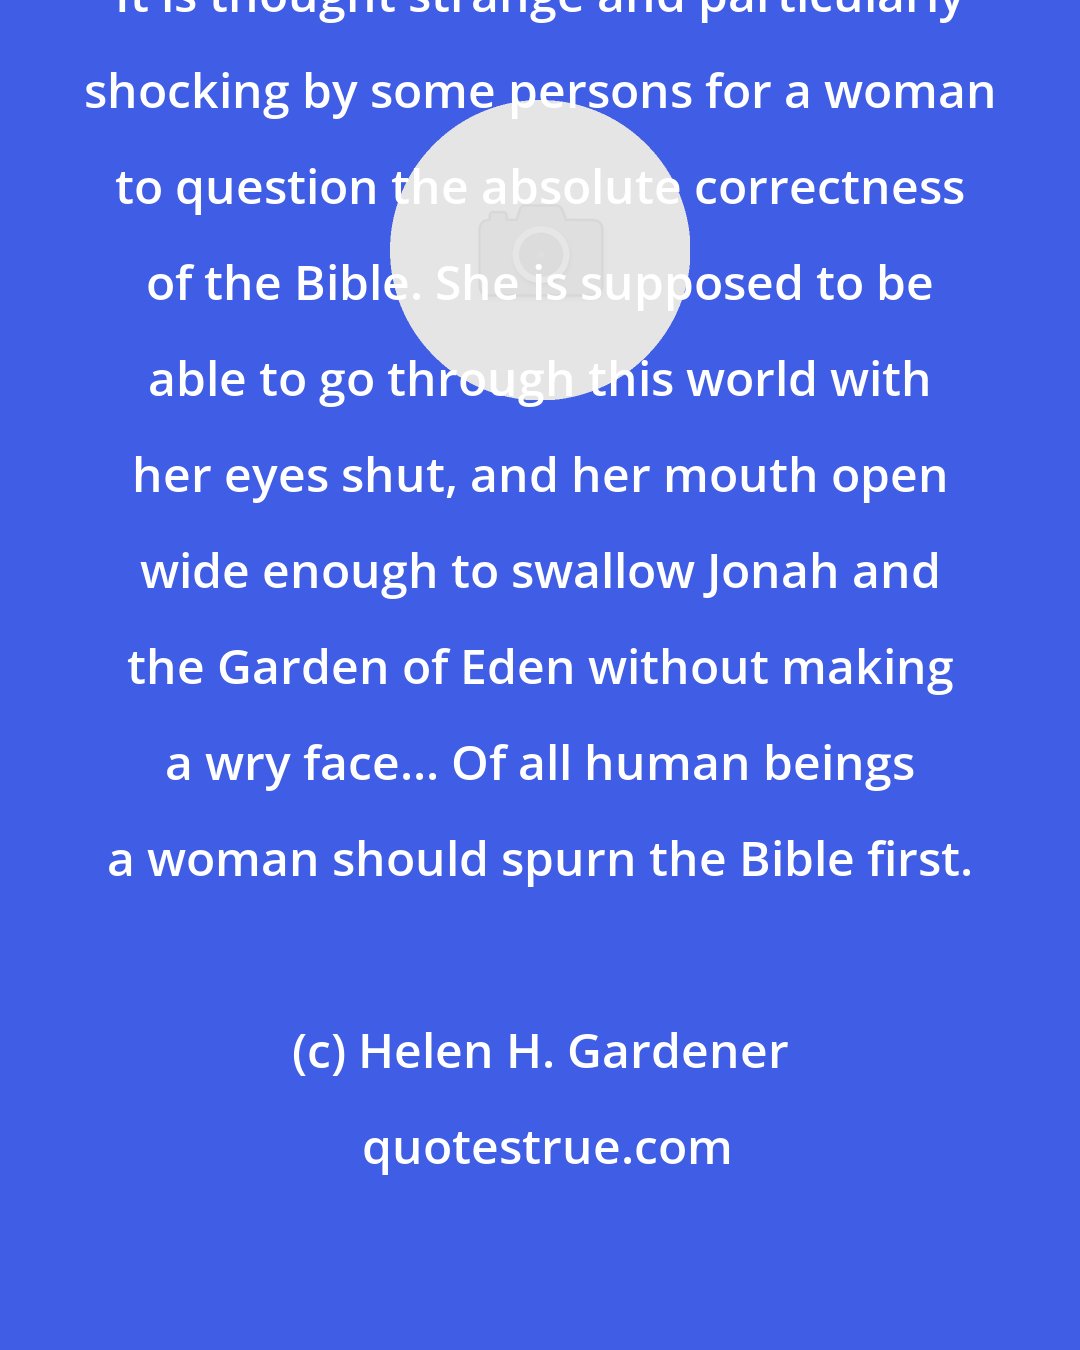 Helen H. Gardener: It is thought strange and particularly shocking by some persons for a woman to question the absolute correctness of the Bible. She is supposed to be able to go through this world with her eyes shut, and her mouth open wide enough to swallow Jonah and the Garden of Eden without making a wry face... Of all human beings a woman should spurn the Bible first.